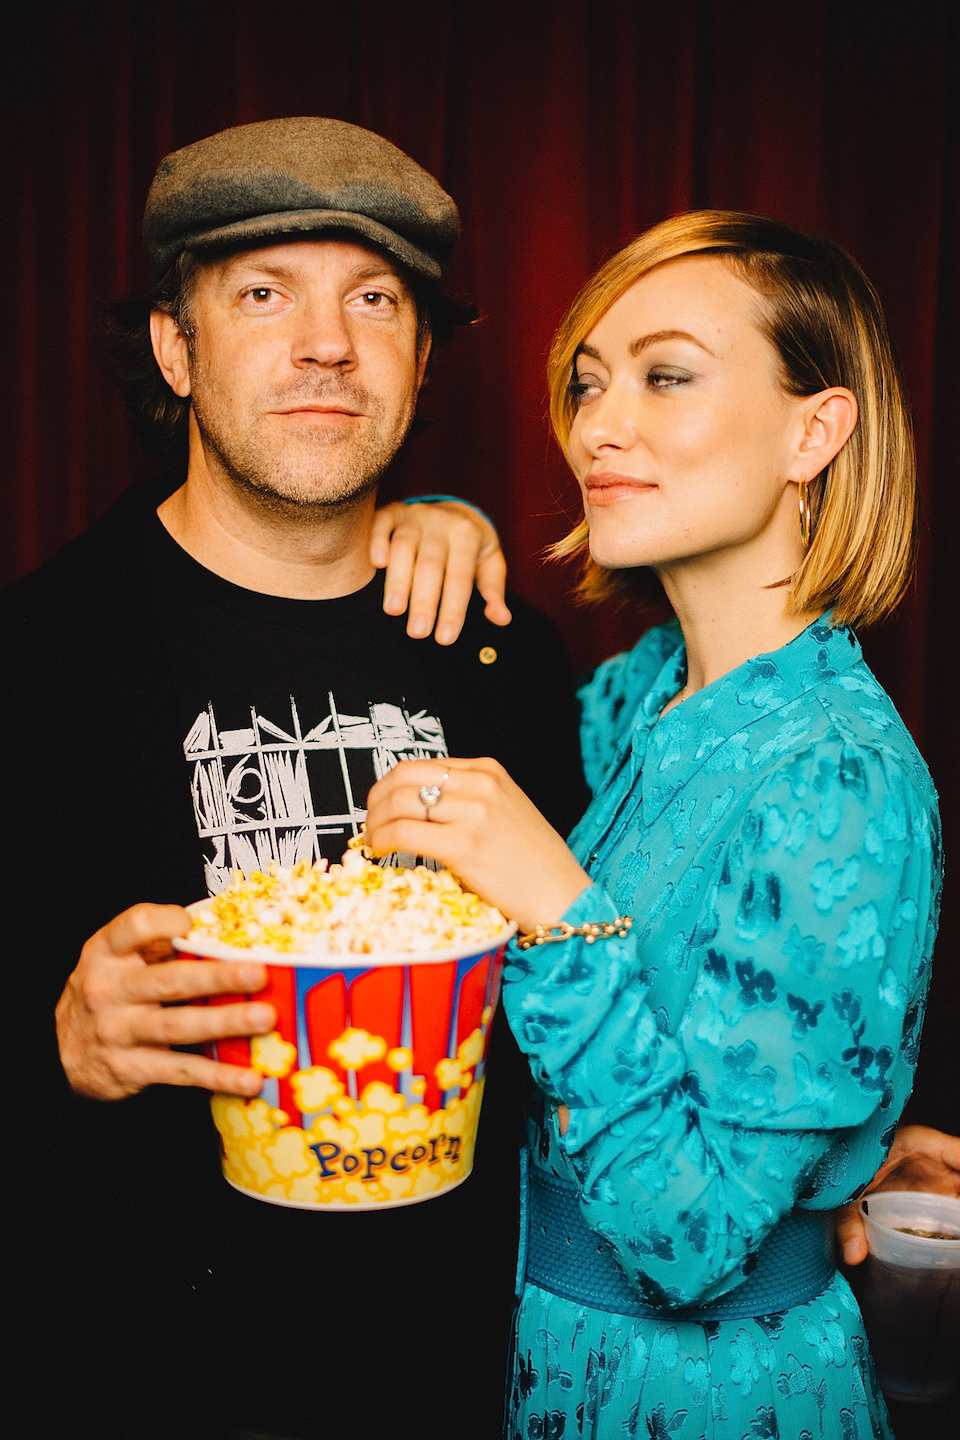 Jason Sudeikis and Olivia Wilde pose for a portrait at the world premiere of A Vigilante. Photo by Matt Winkelmeyer/Contour by Getty Images for SXSW